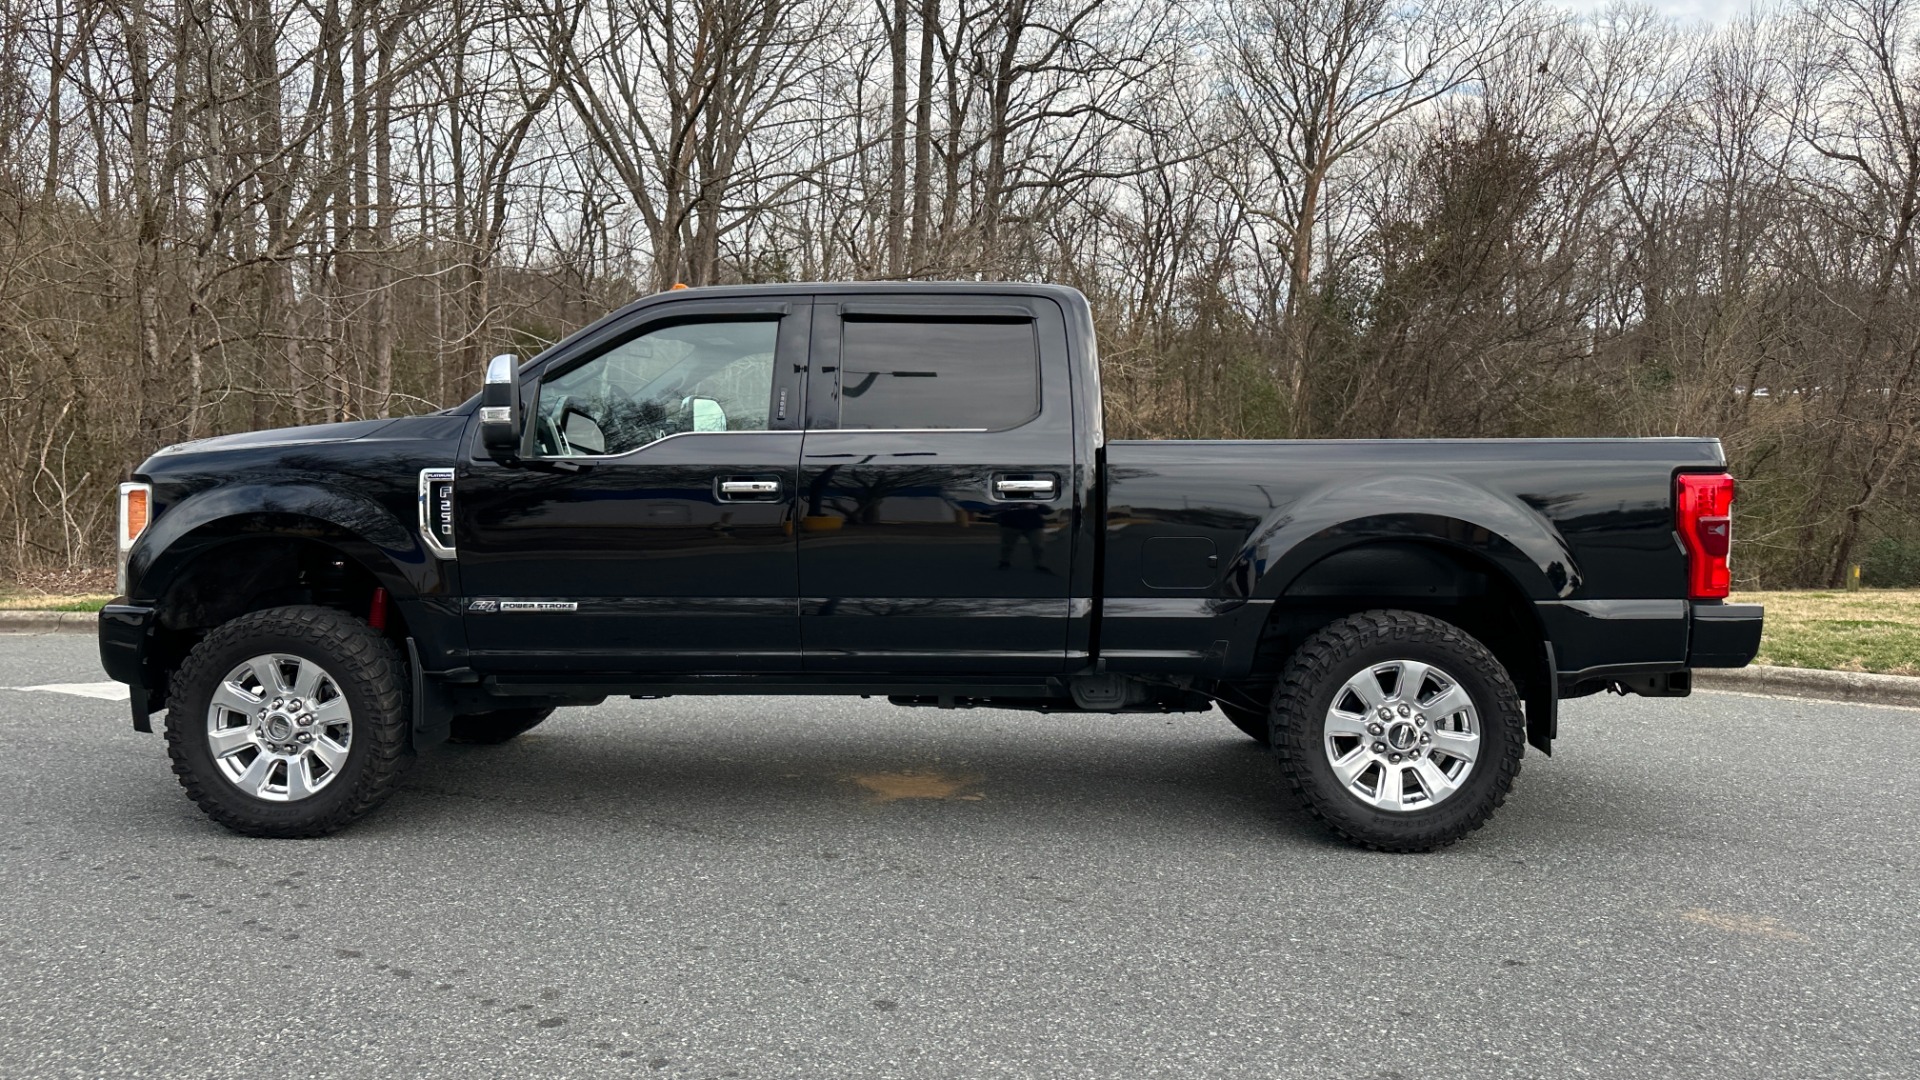 Used 2017 Ford Super Duty F-250 SRW PLATINUM / ULTIMATE PACKAGE / FX4 OFFROAD / 6.7L POWERSTROKE DIESEL for sale Sold at Formula Imports in Charlotte NC 28227 3